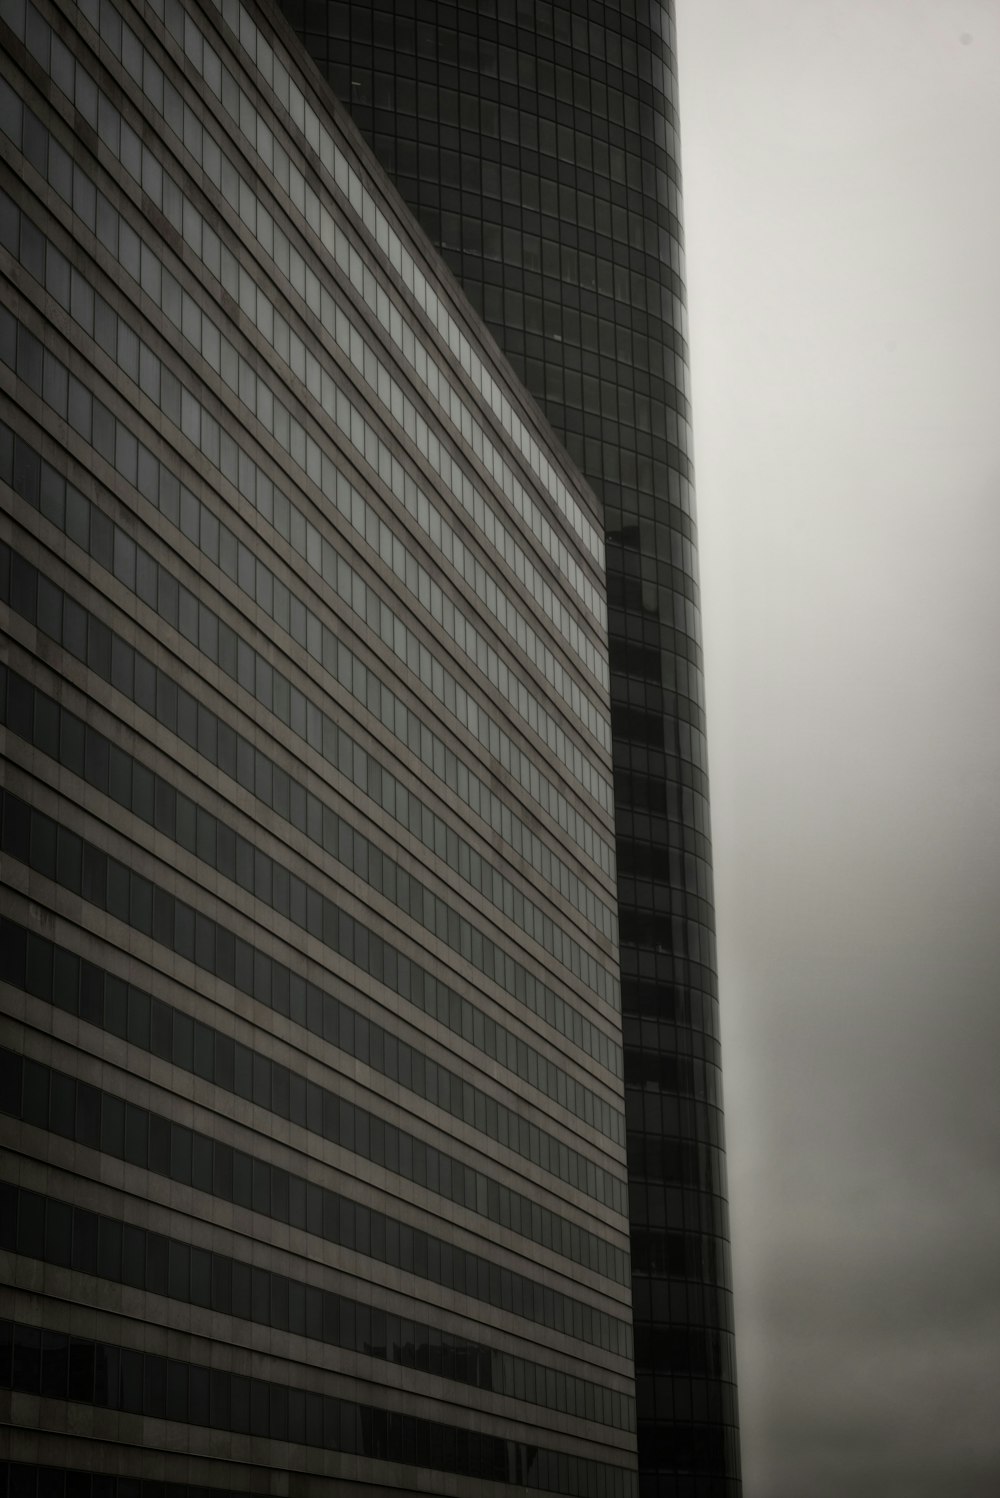 a tall building with a cloudy sky